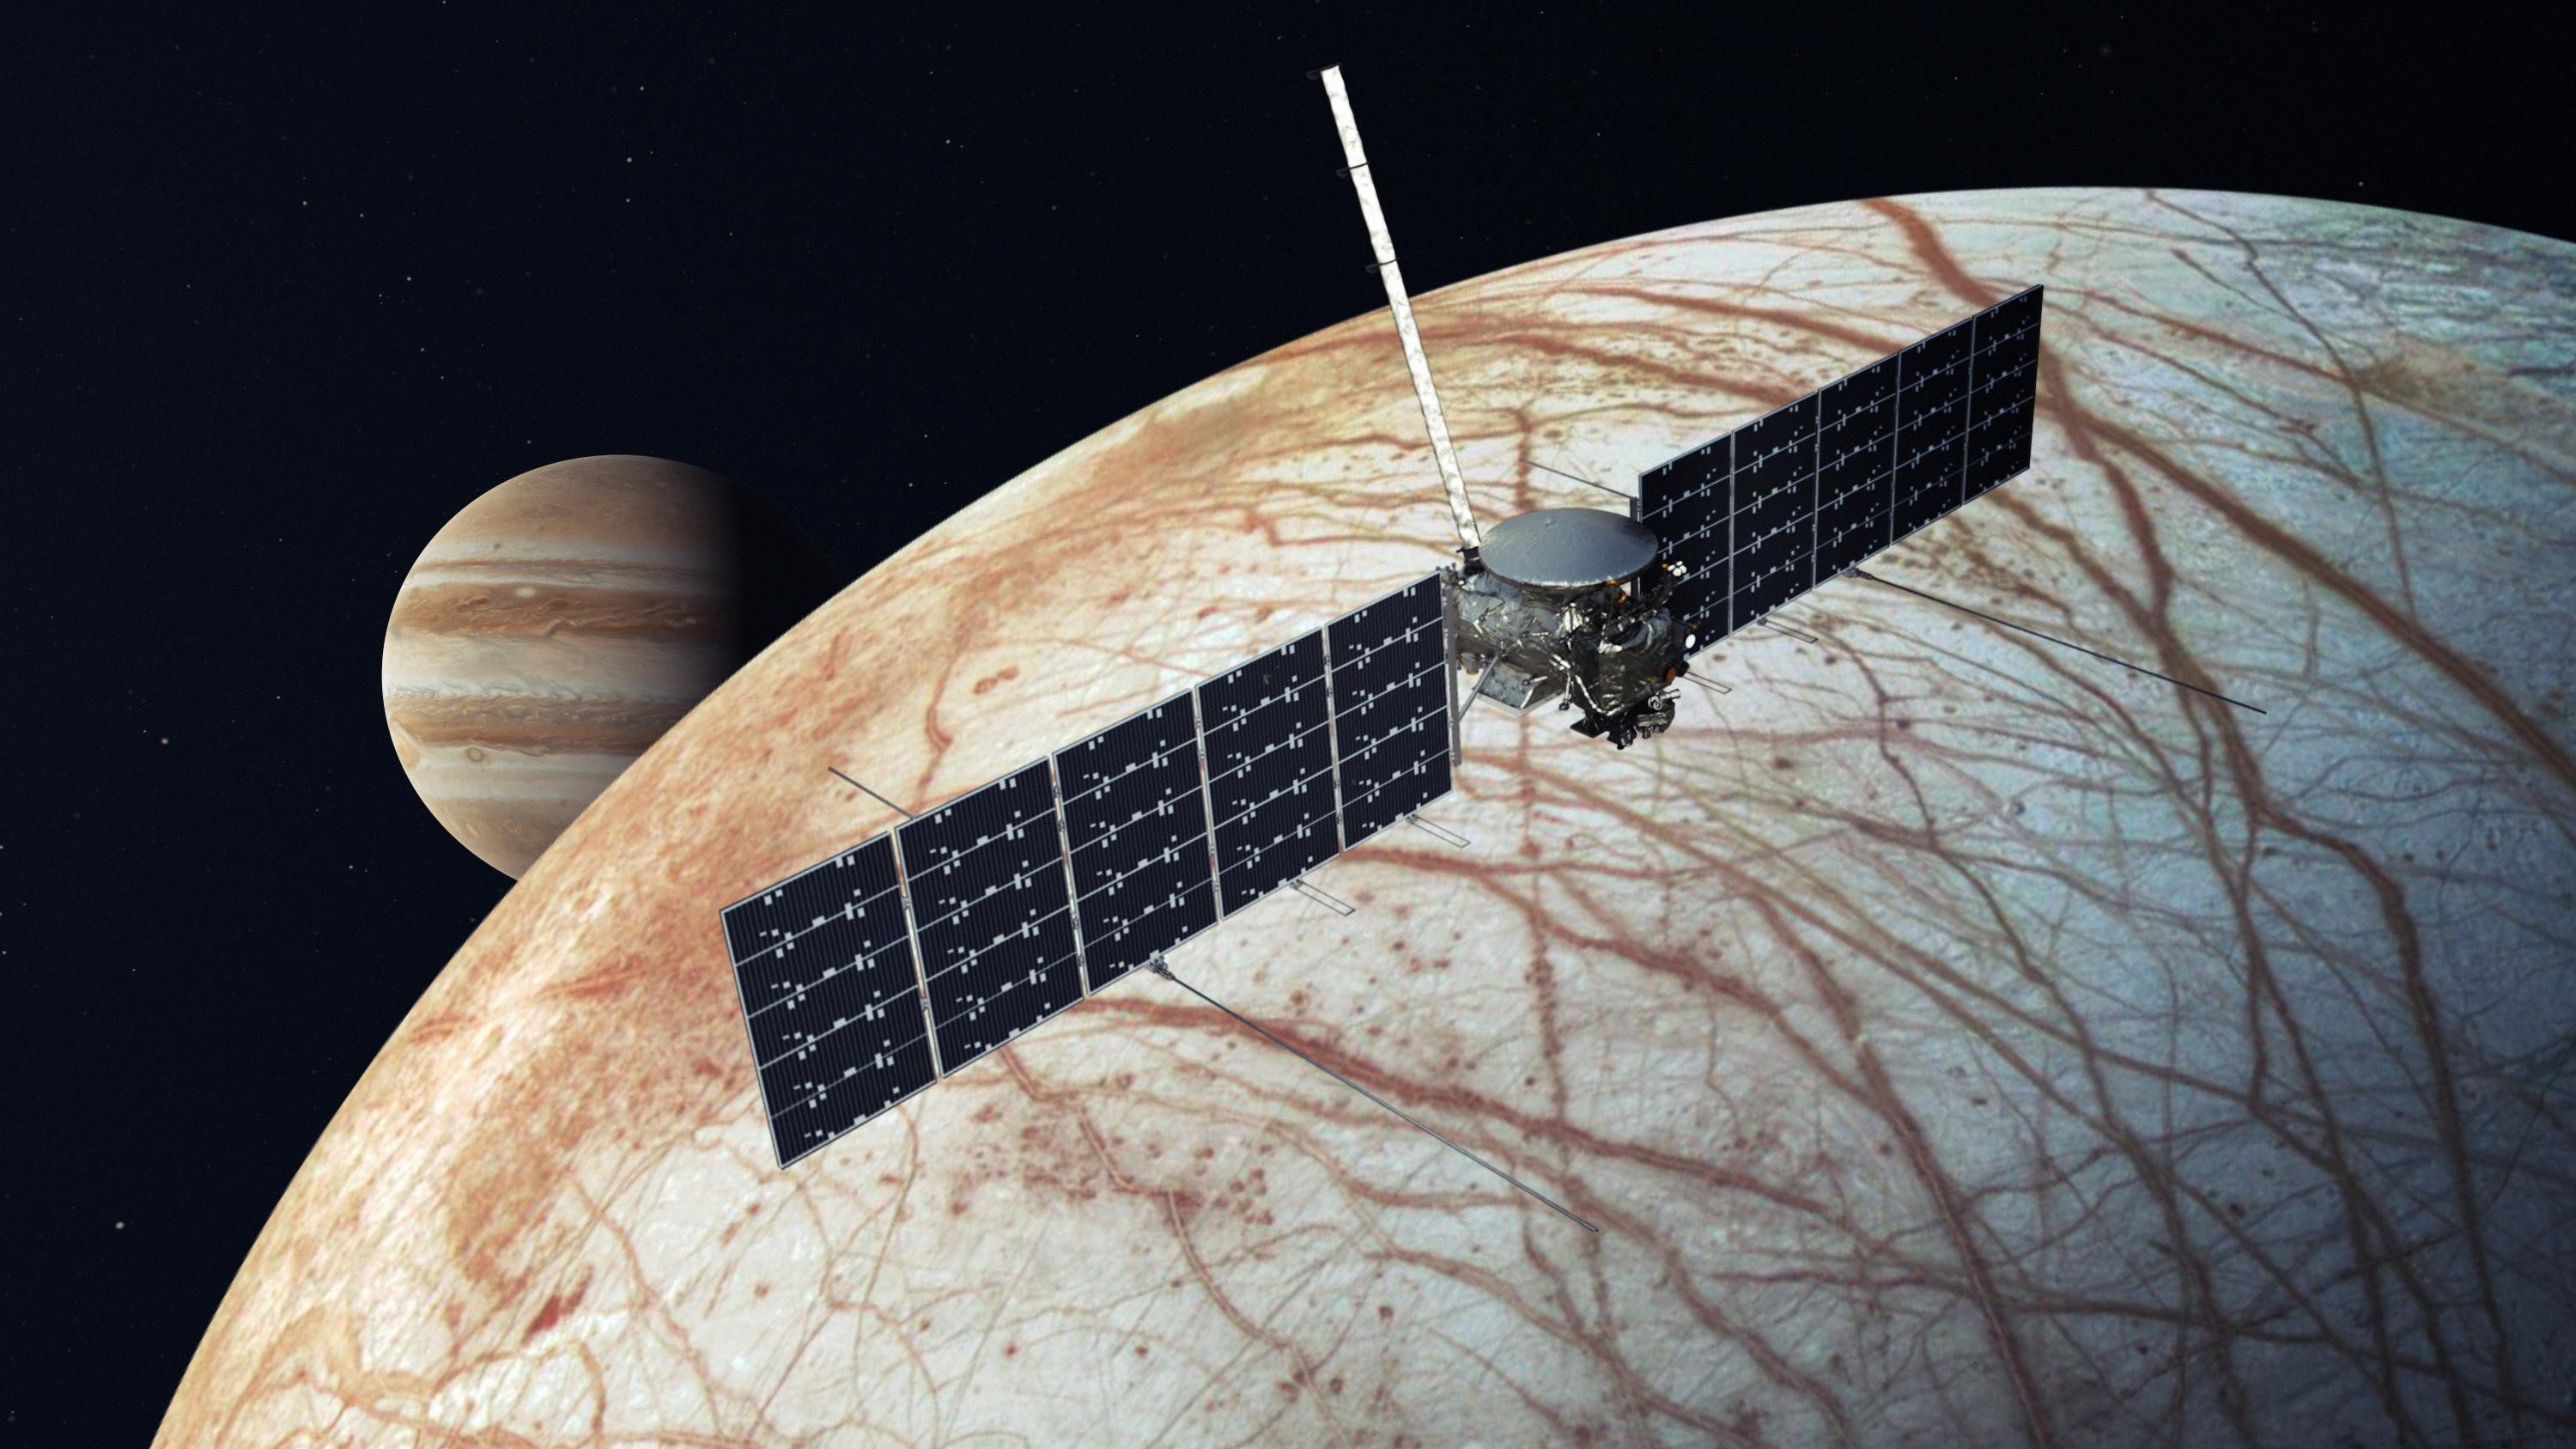 An illustration of Europa Clipper.